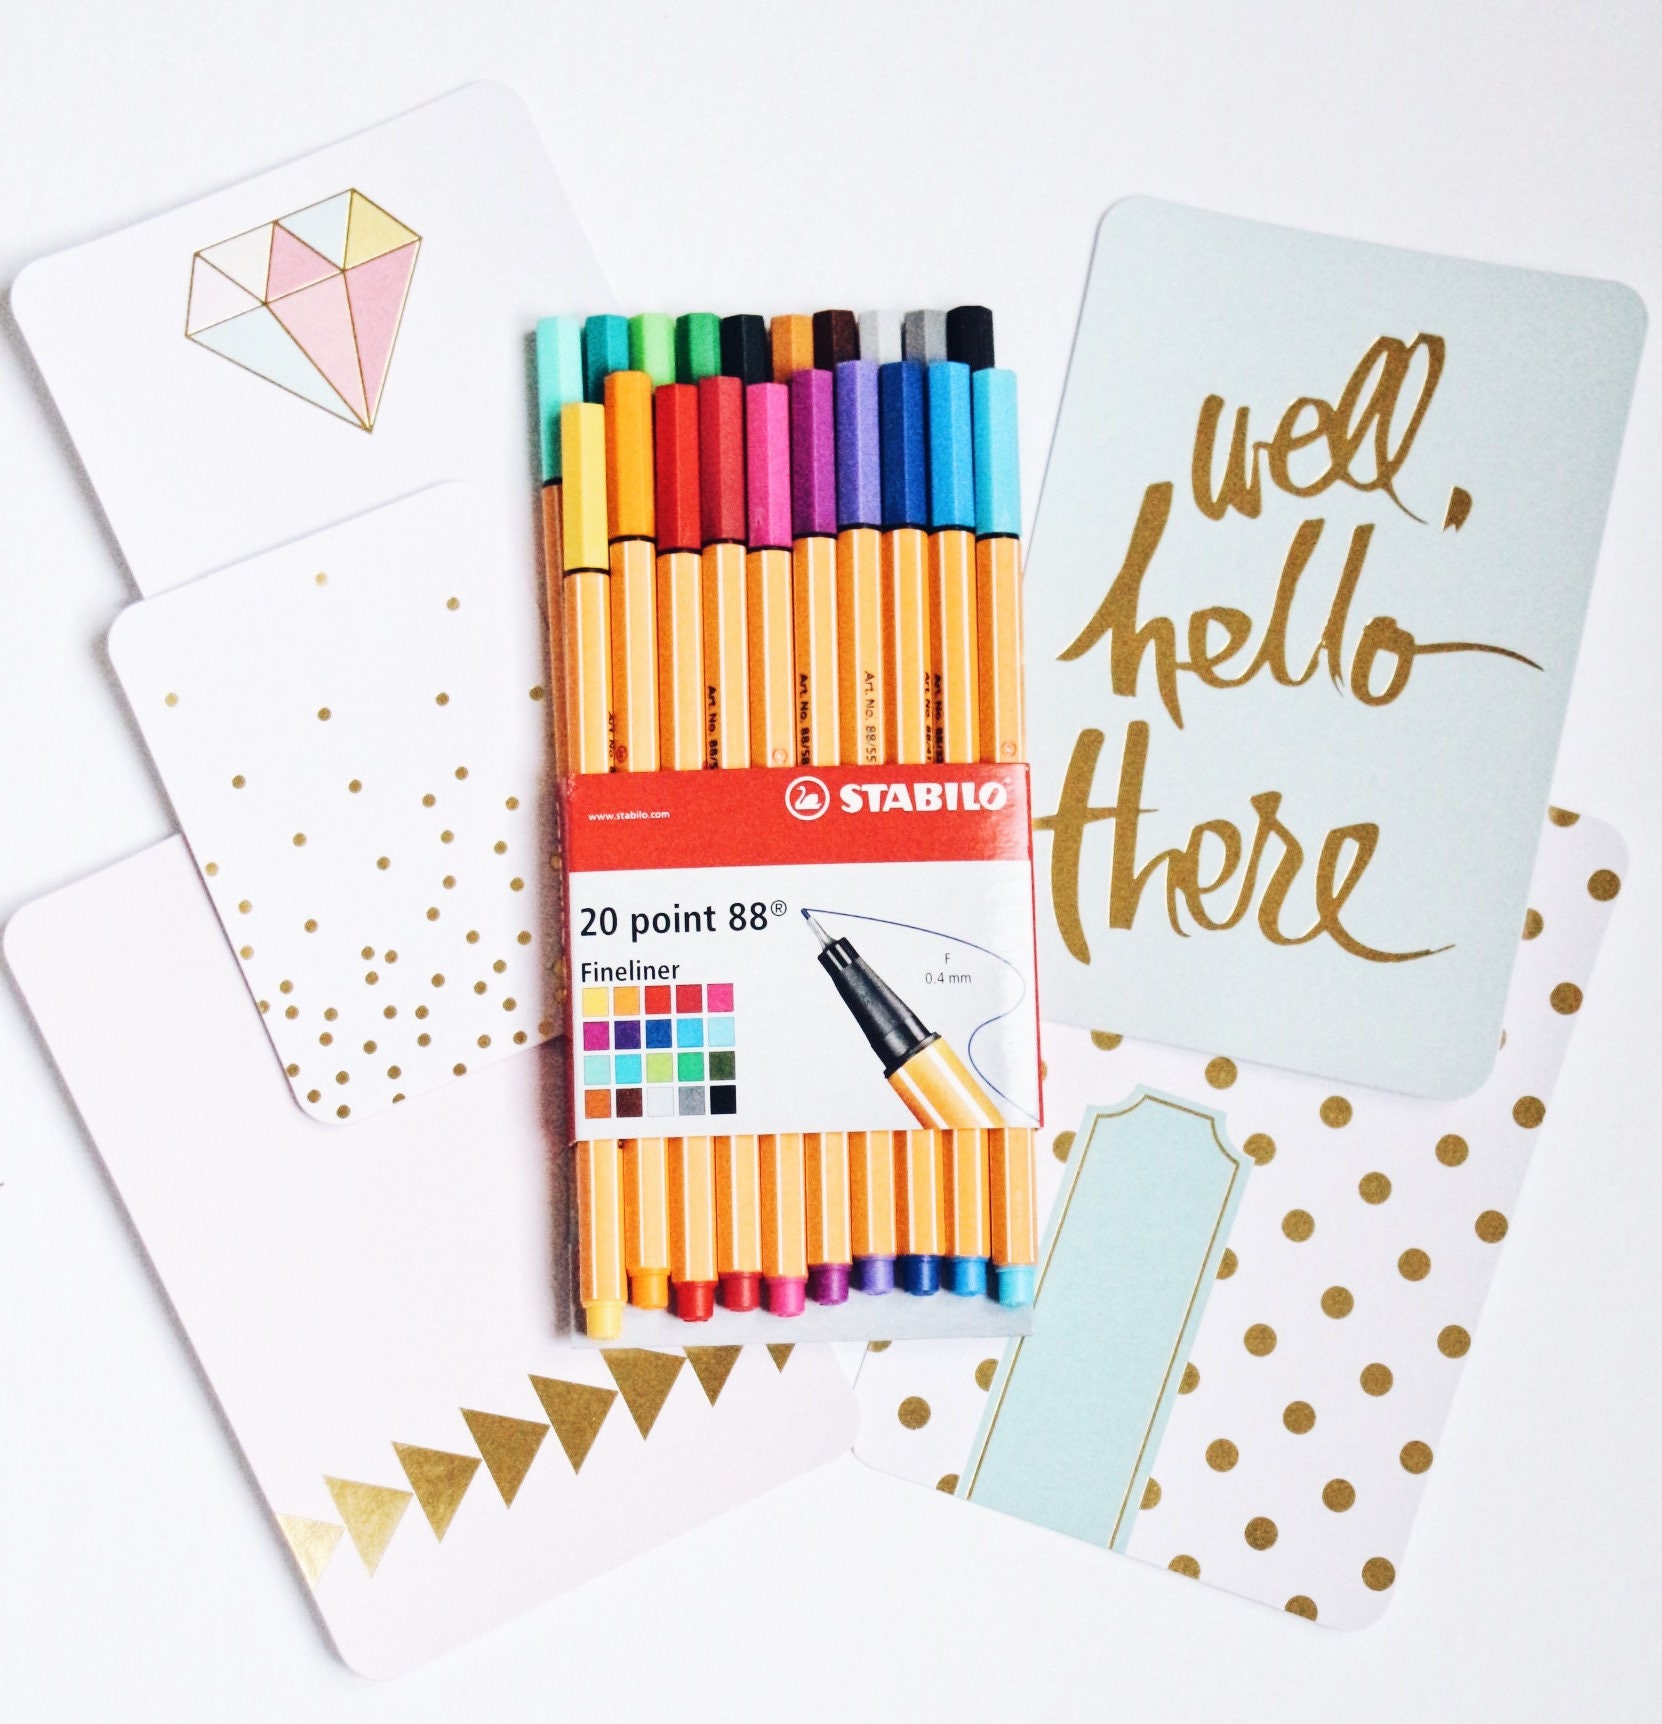 Stabilo Pens 20 Point 88 With 5 Note Cards of Our Shop - Etsy